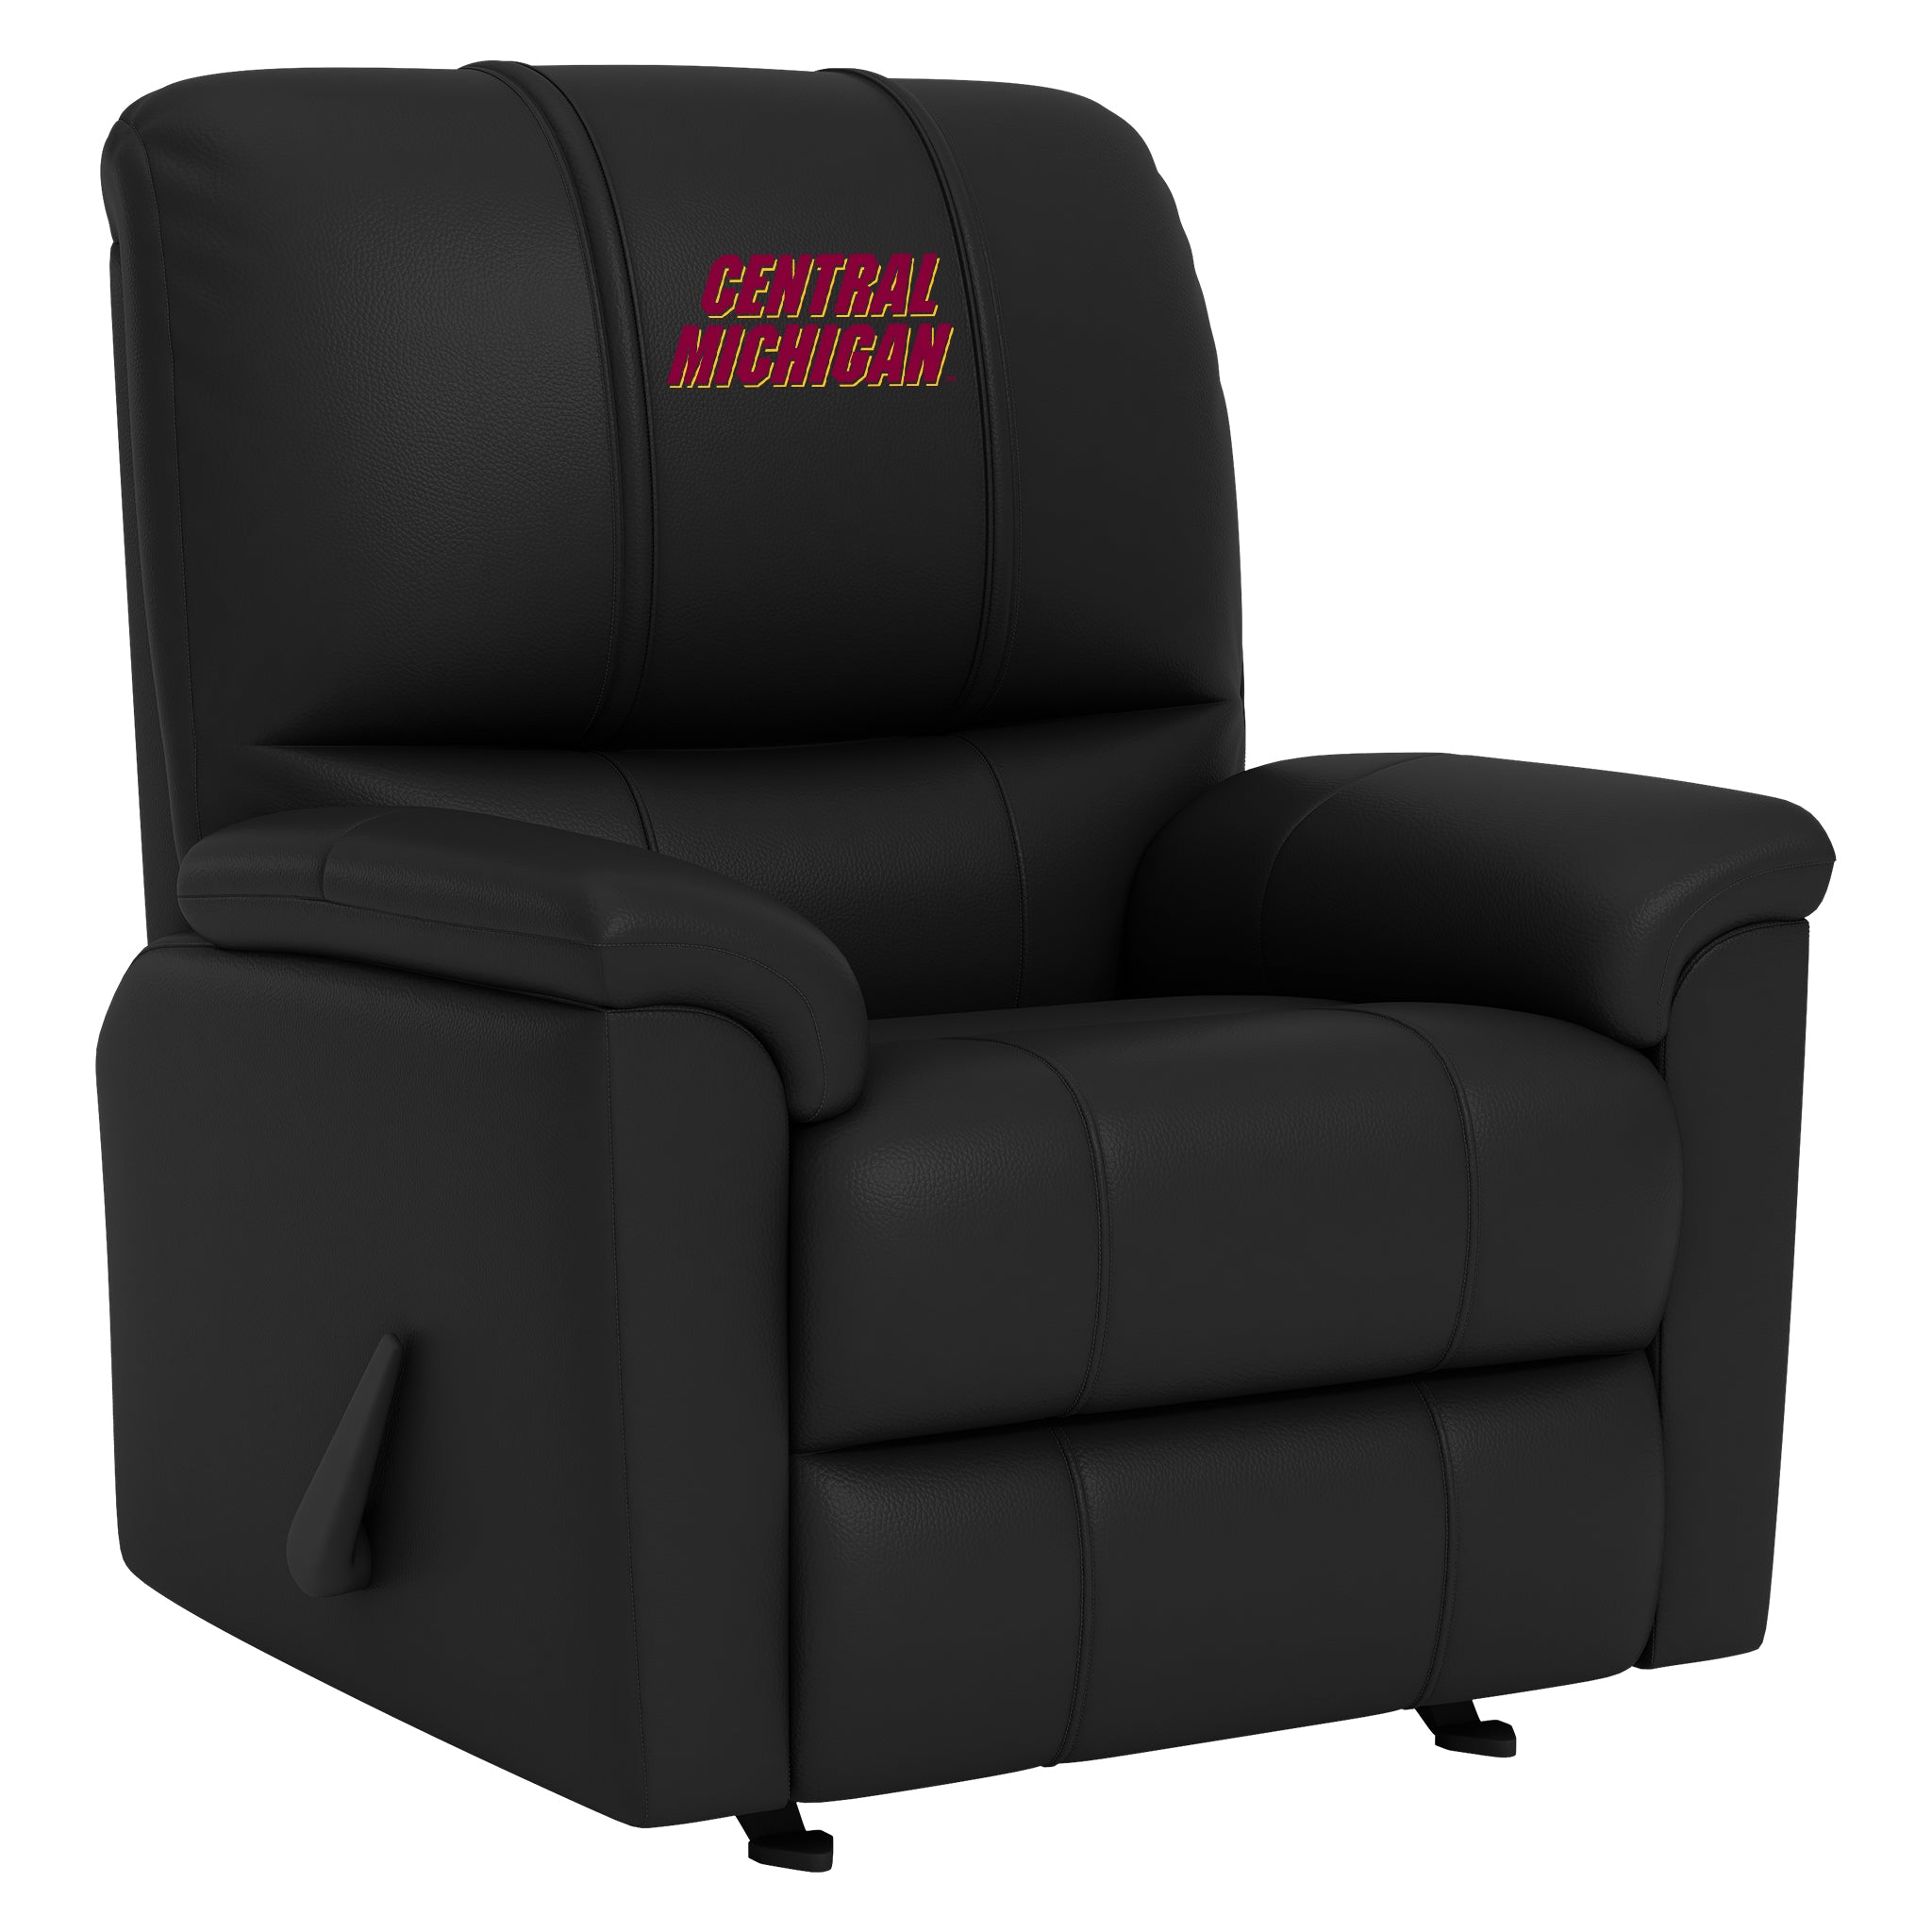 Central Michigan Silver Club Chair with Central Michigan Primary